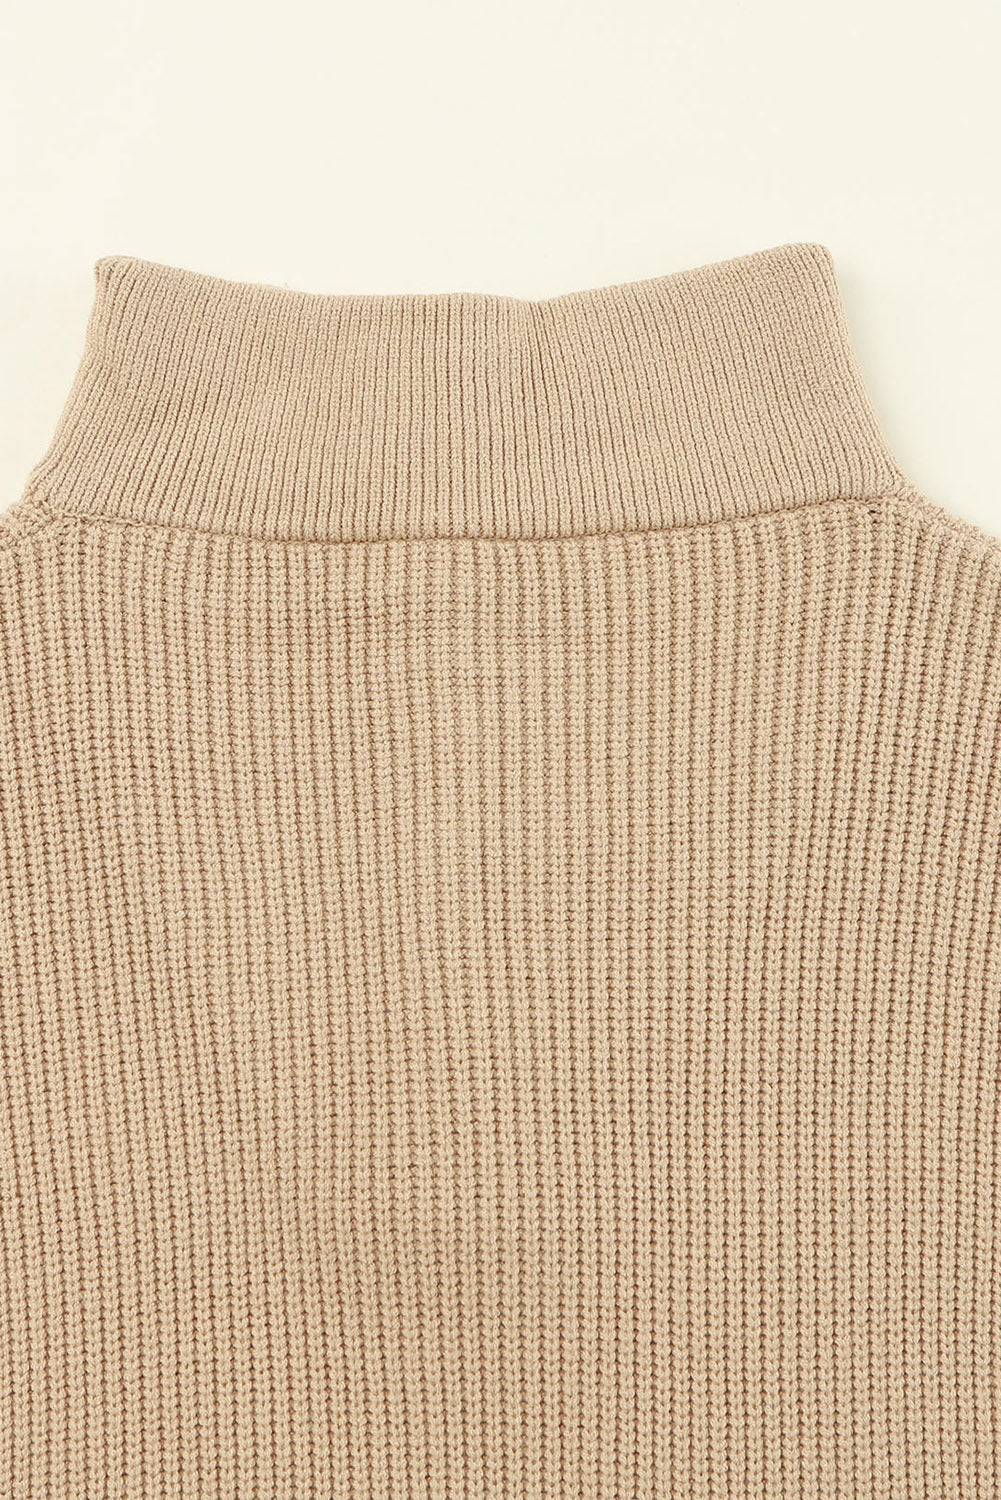 Khaki Buttoned Turn Down Collar Comfy Ribbed Sweater